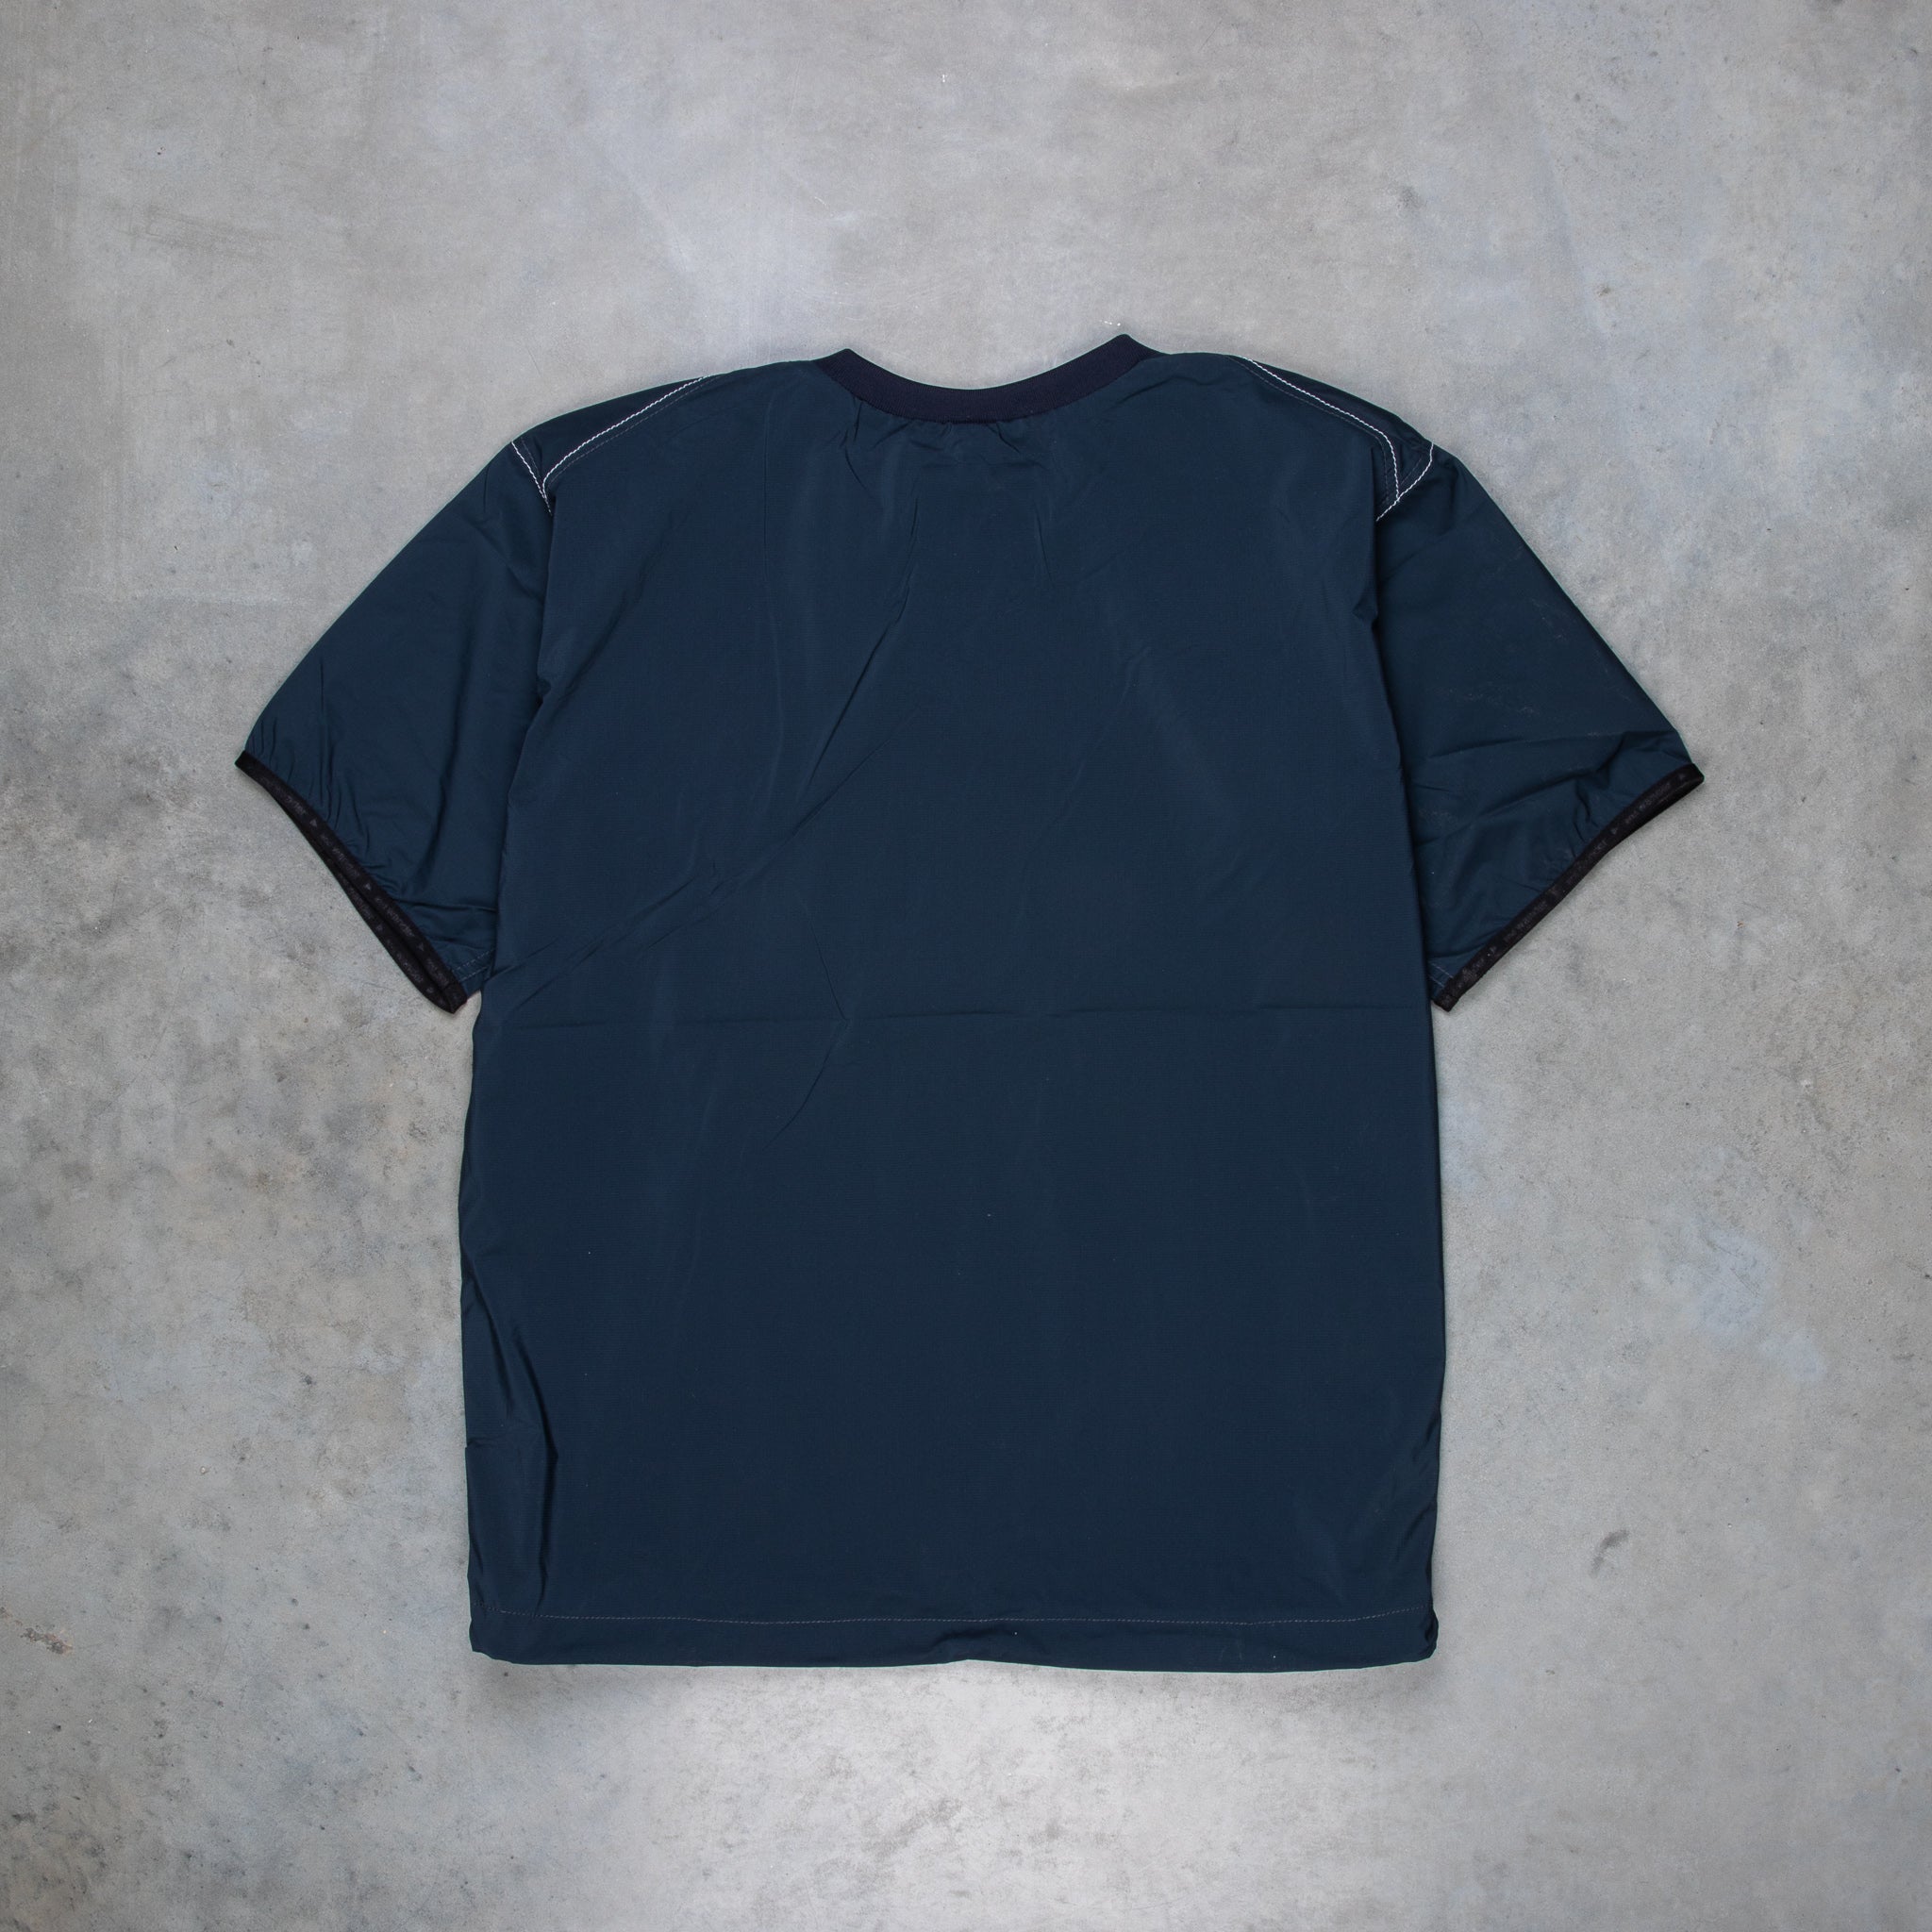 And Wander Pertex Wind T Navy – Frans Boone Store